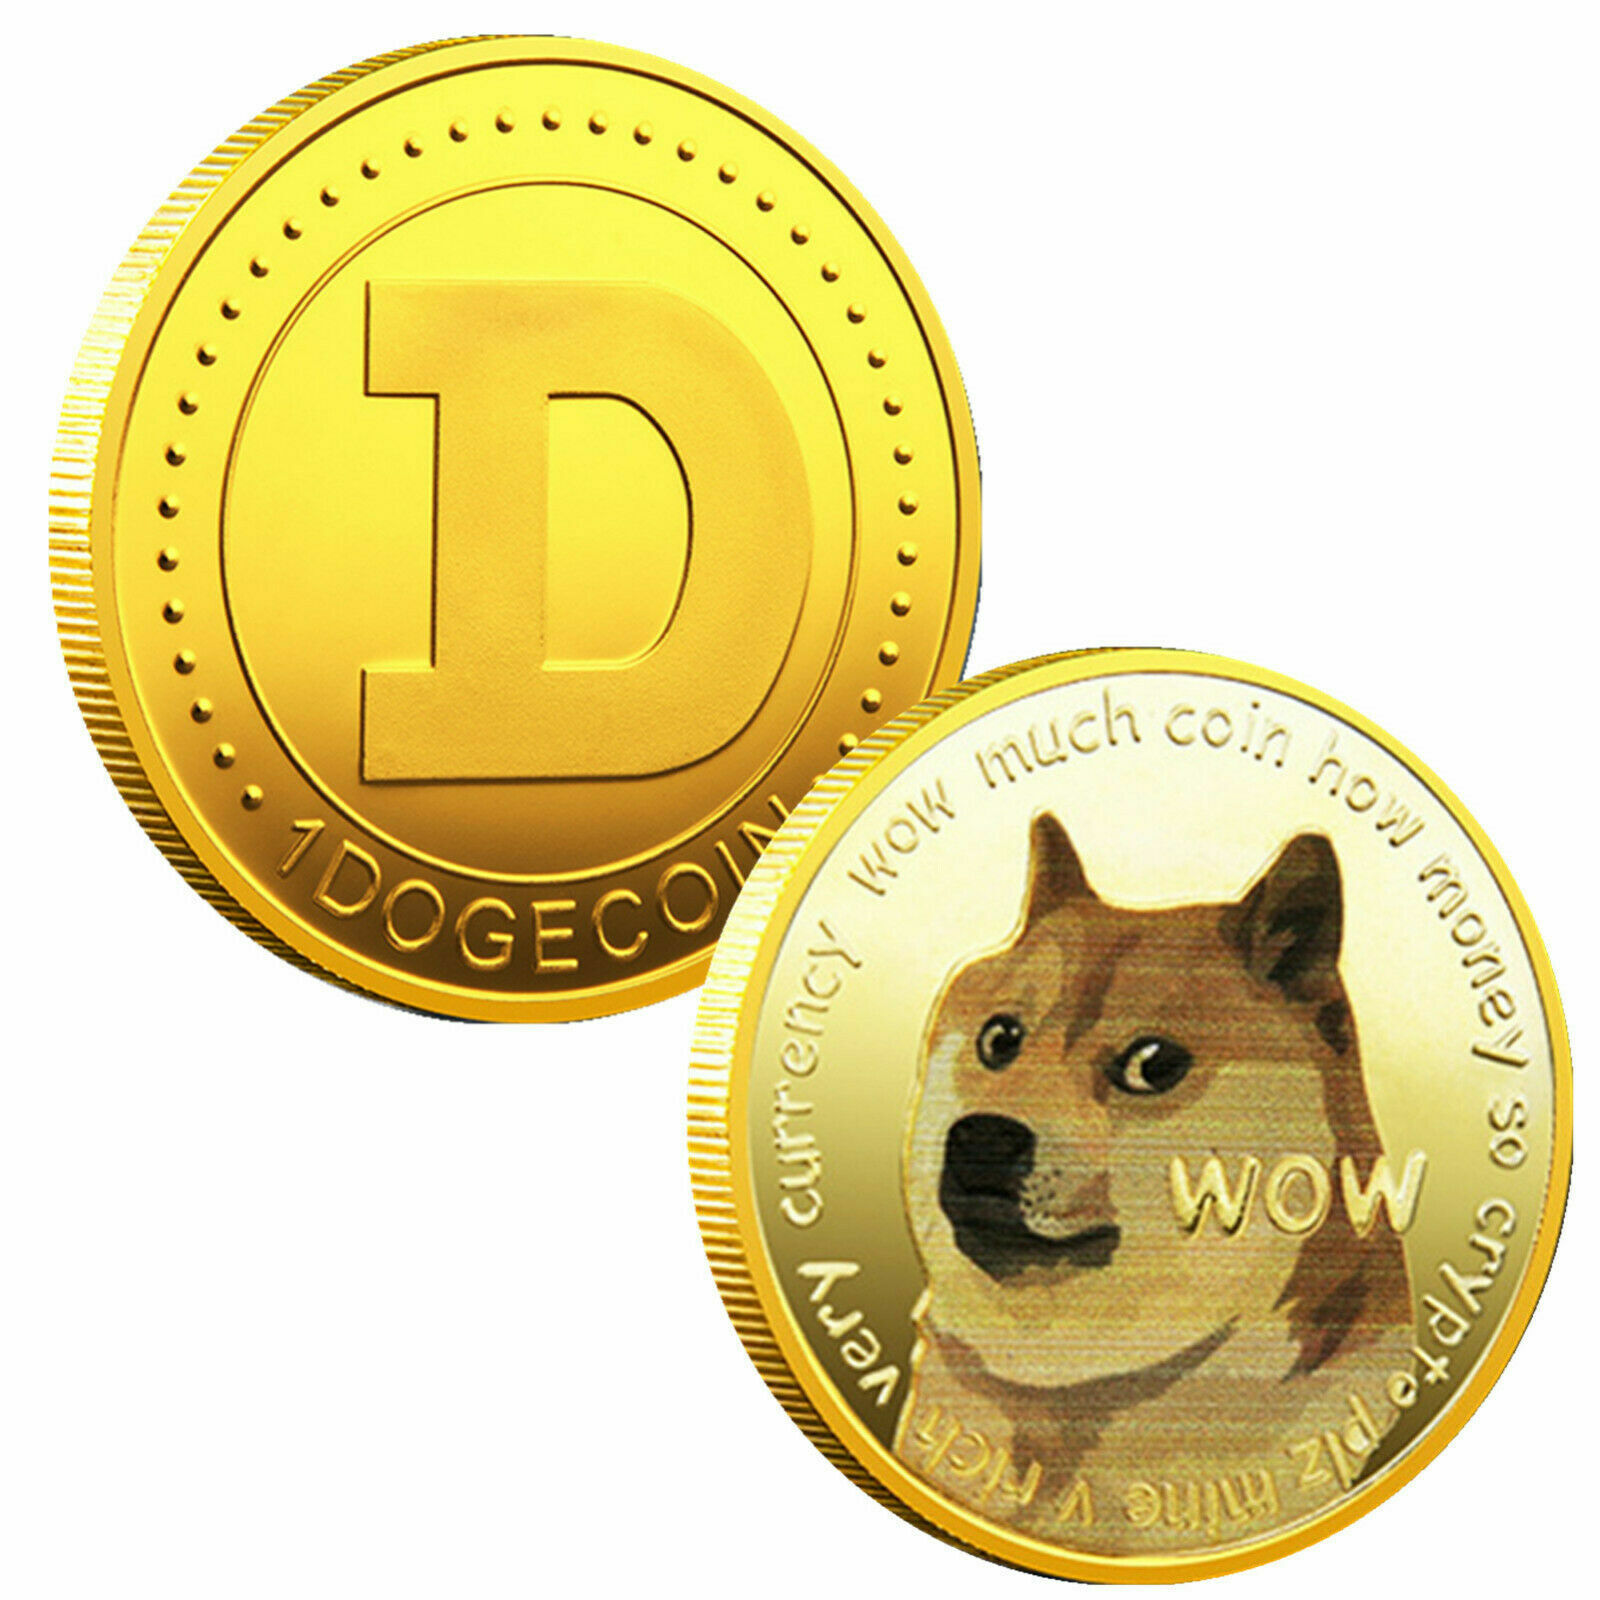 1x Gold Dogecoin Coins Commemorative 2021 New Collectors Gold Plated Doge Coin